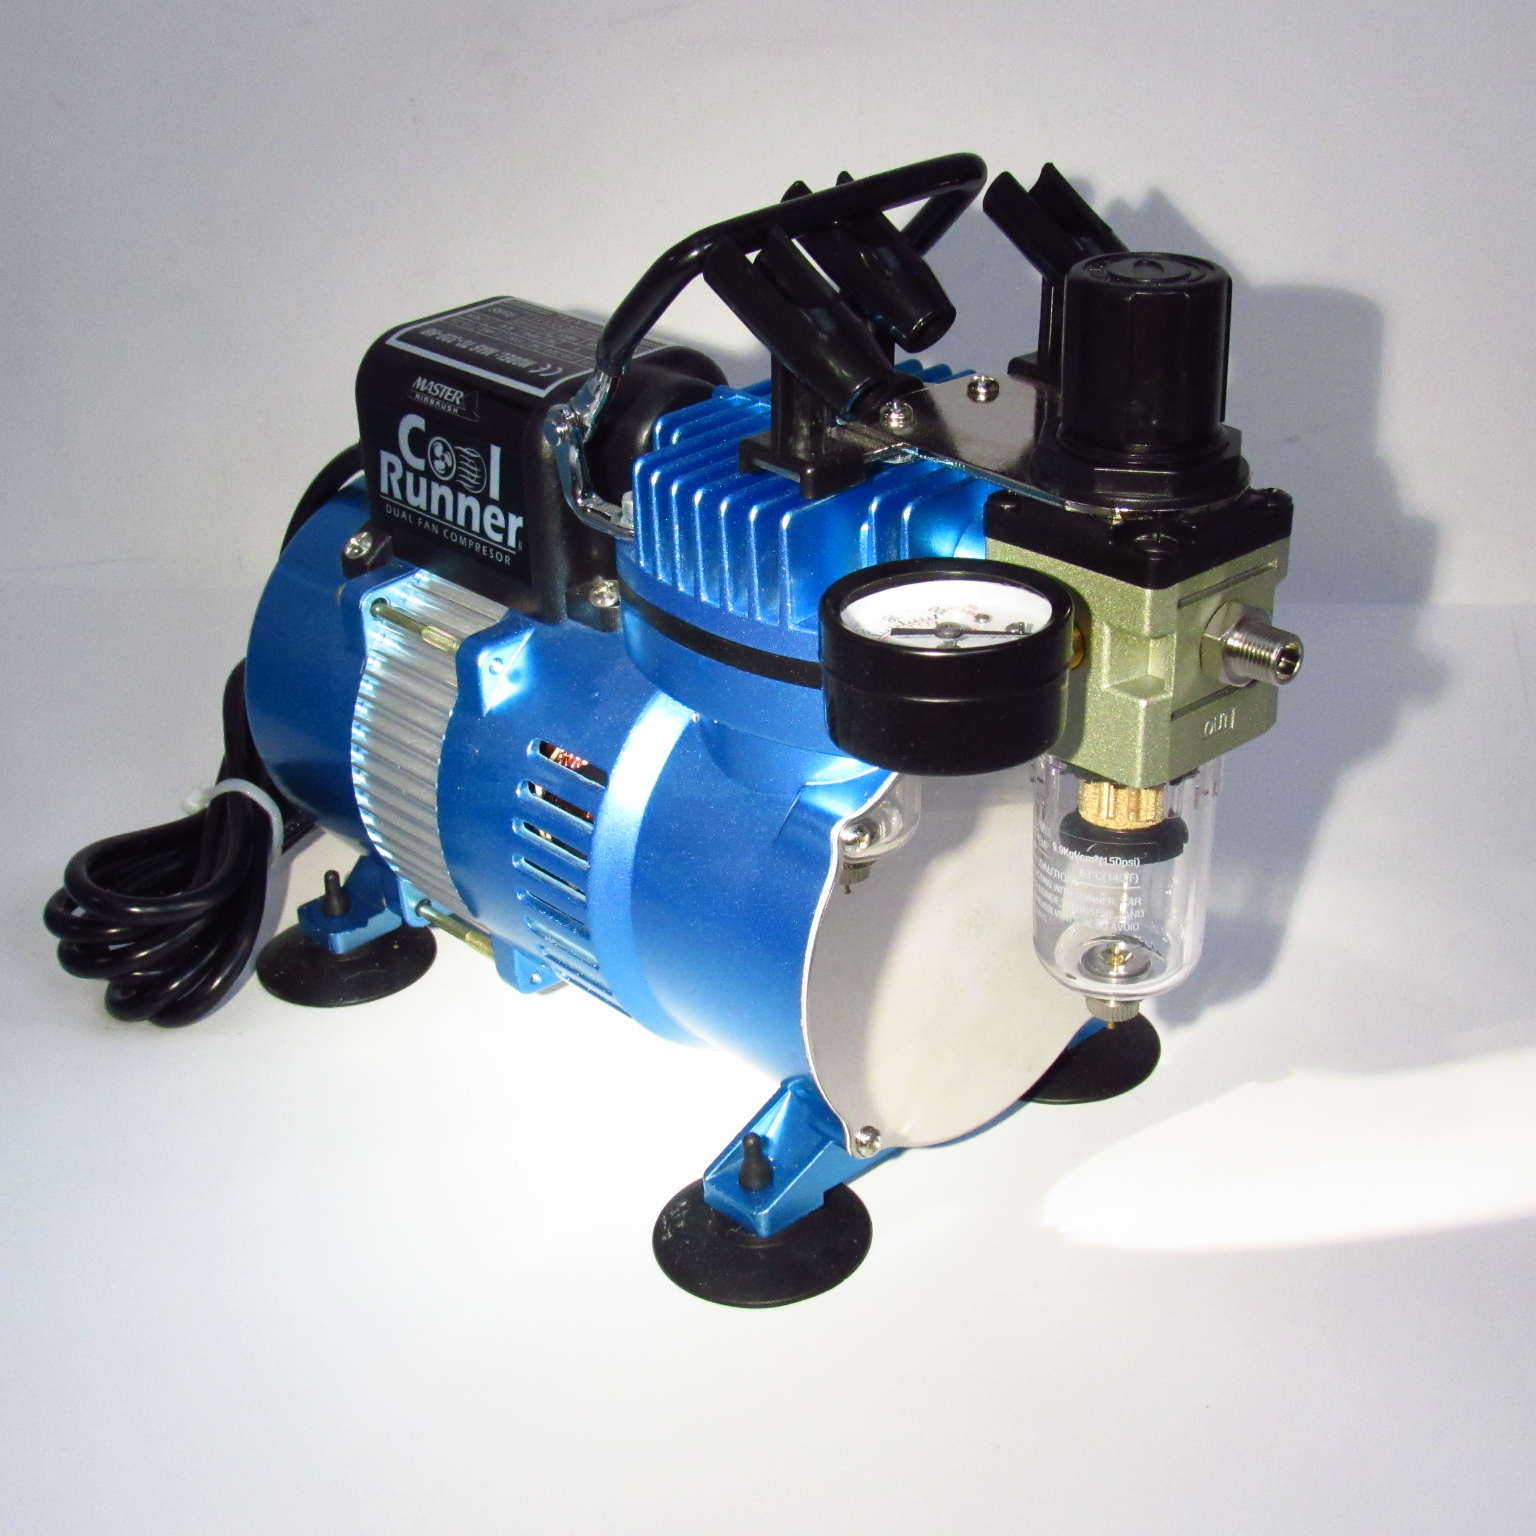 Master Airbrush Cool Runner II Dual Fan Air Compressor and